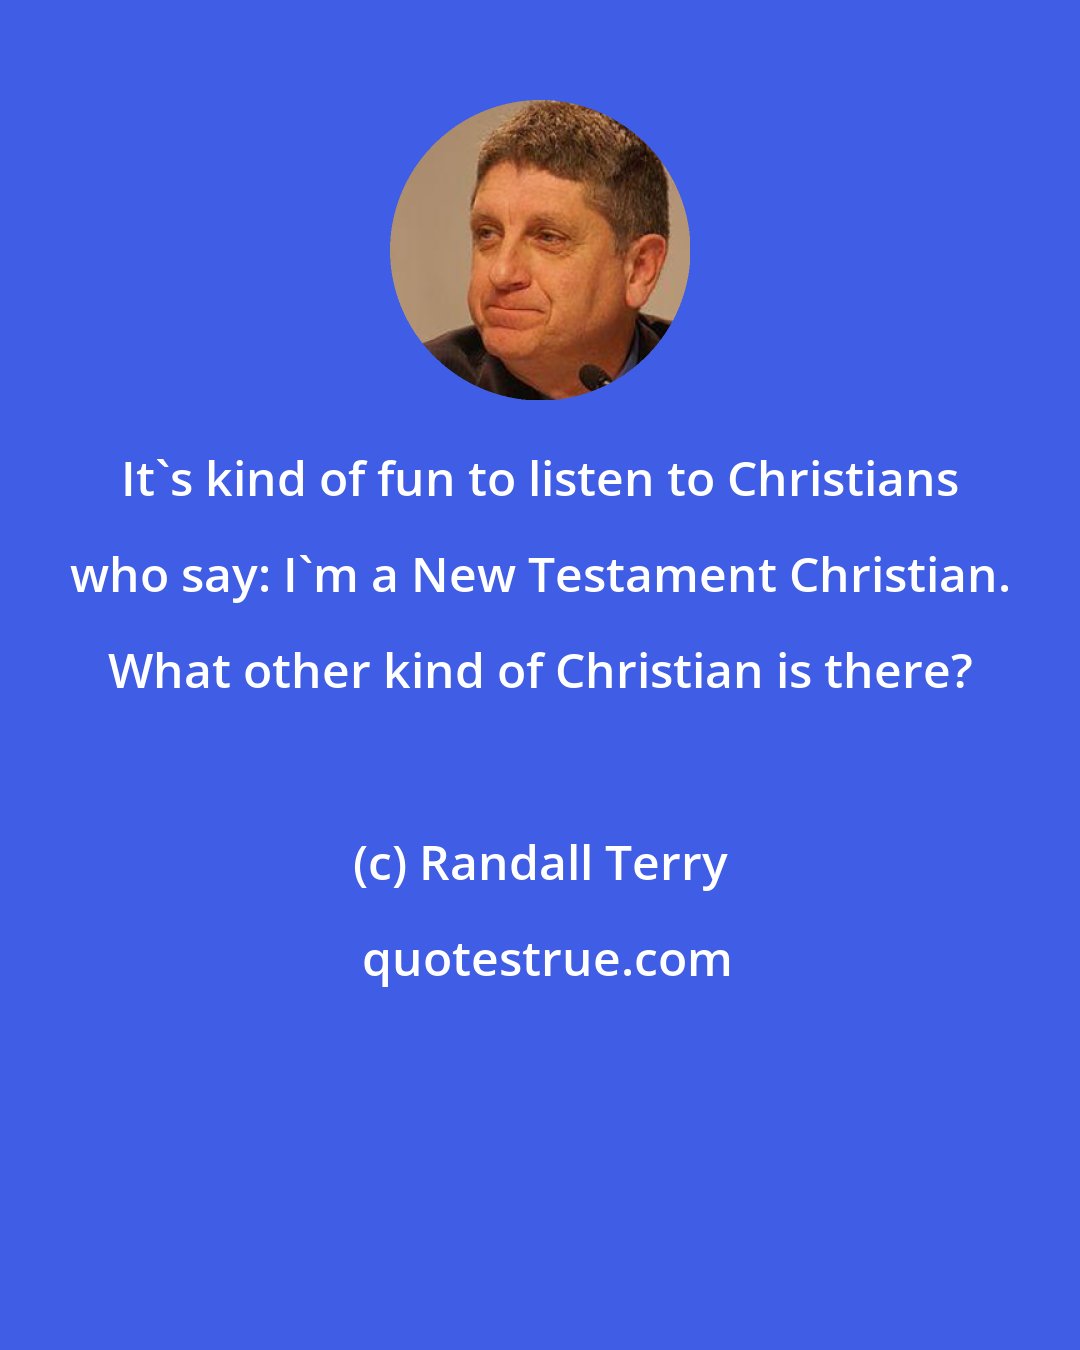 Randall Terry: It's kind of fun to listen to Christians who say: I'm a New Testament Christian. What other kind of Christian is there?